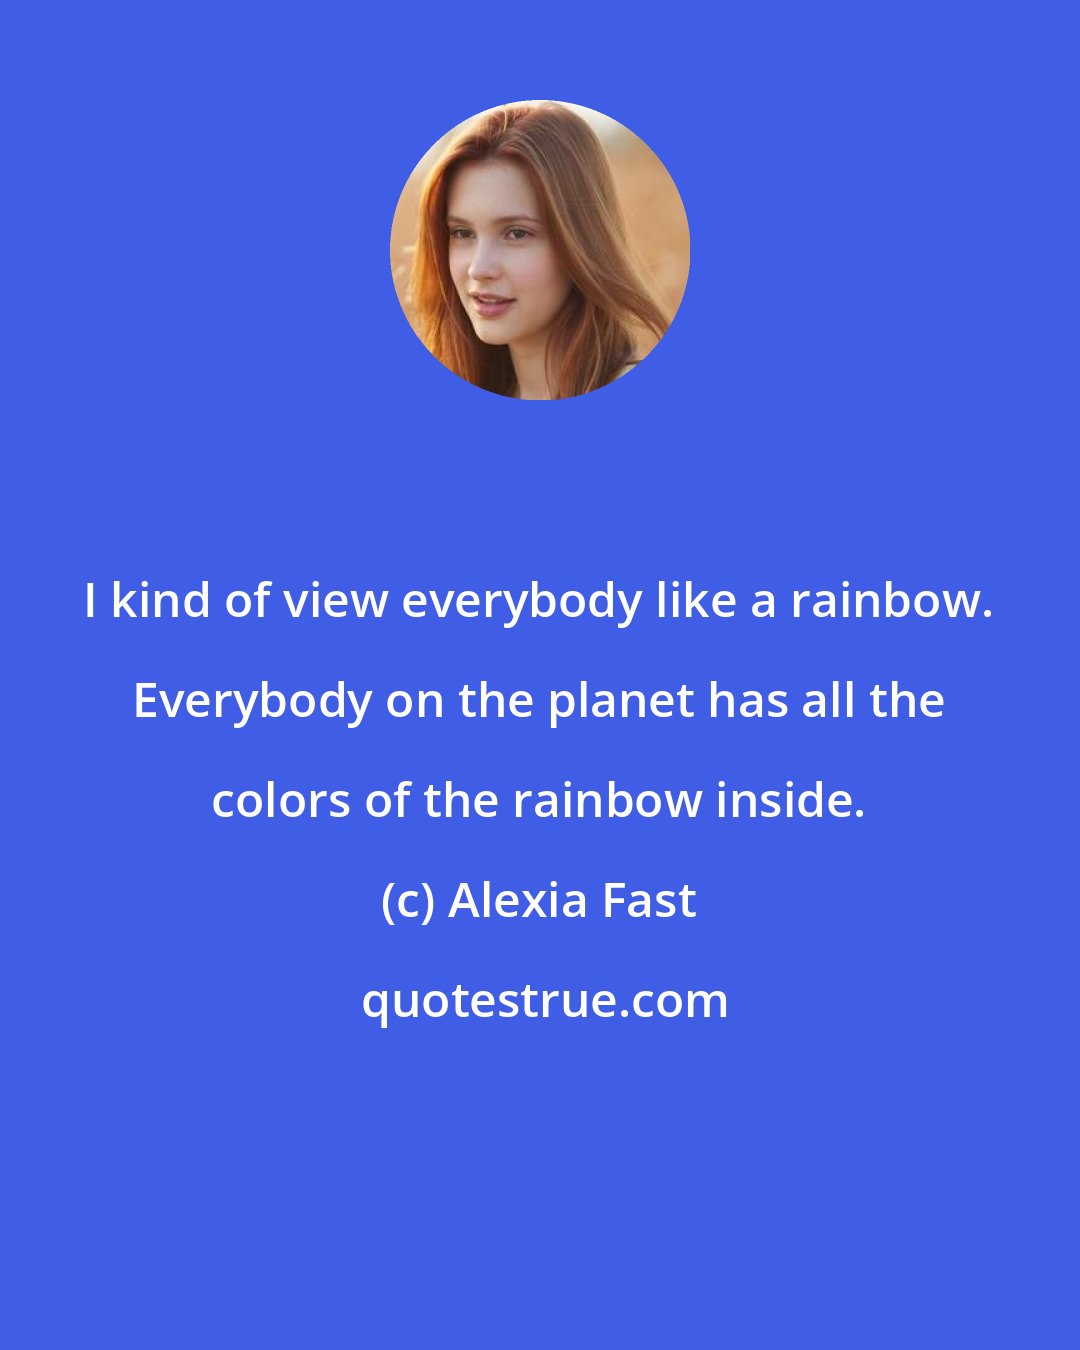 Alexia Fast: I kind of view everybody like a rainbow. Everybody on the planet has all the colors of the rainbow inside.